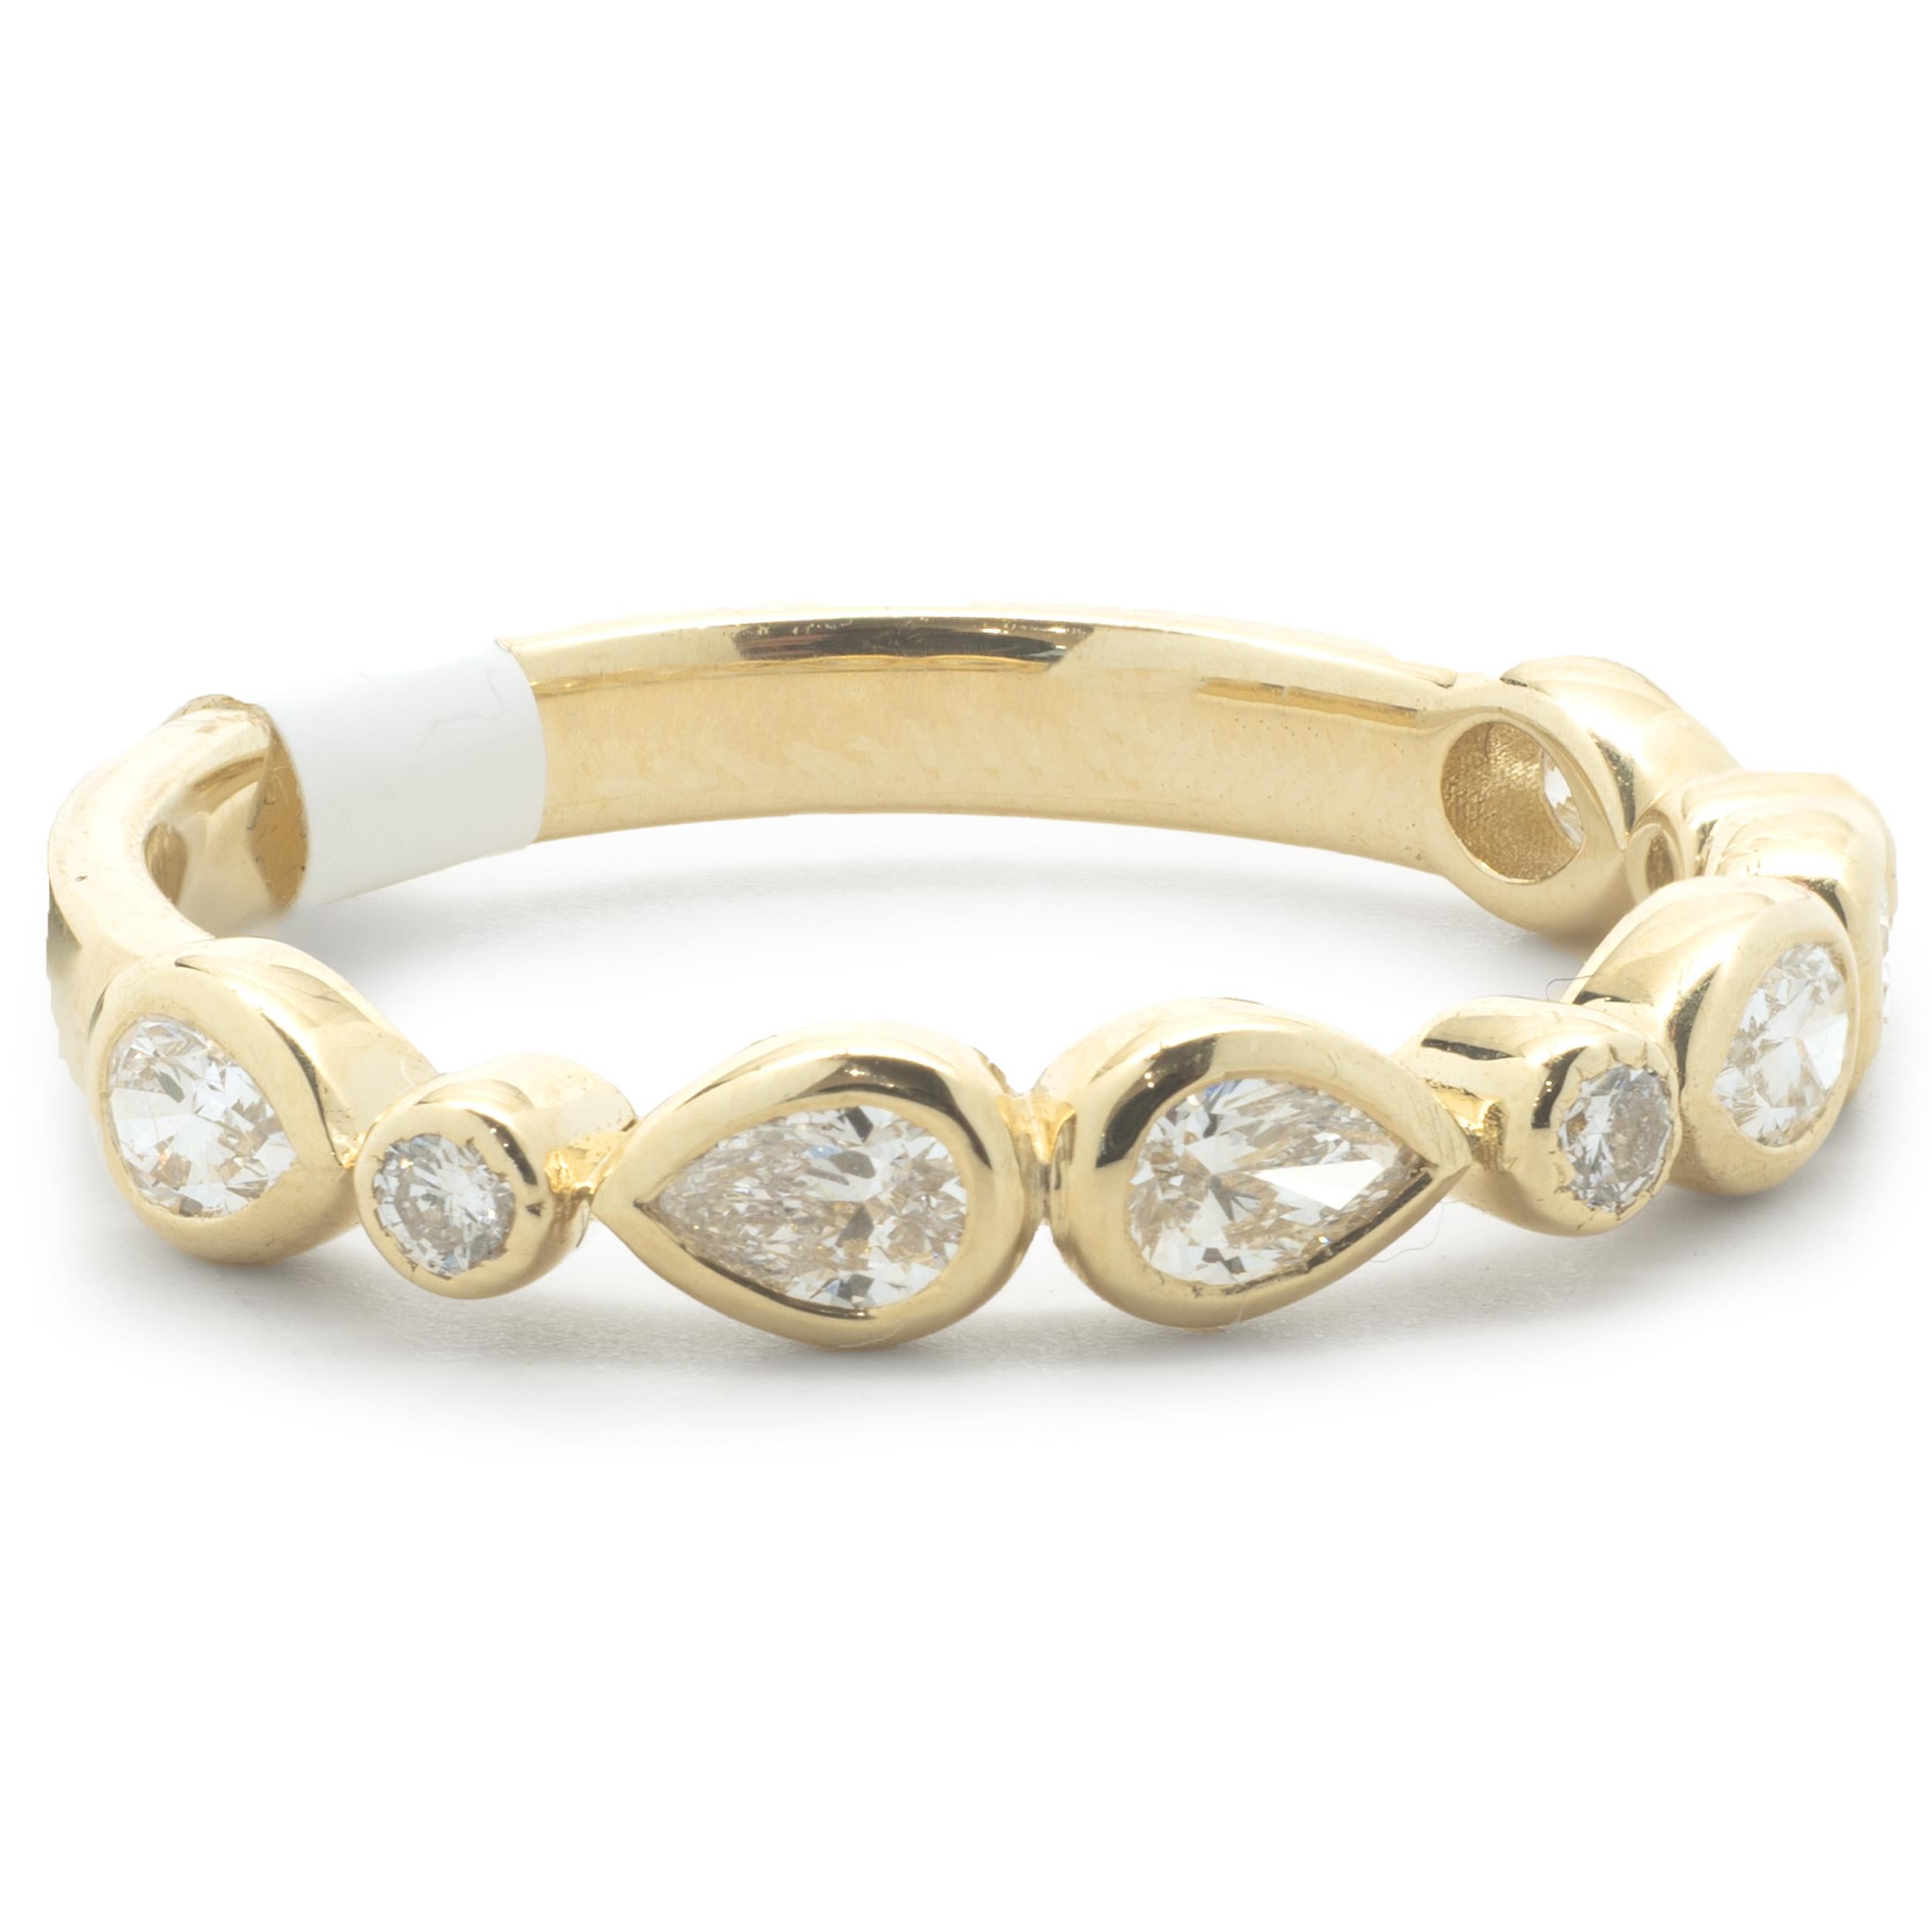 Designer: Custom
Material: 14K yellow gold
Diamonds: 9 pear and round brilliant cut = .50cttw
Color: H
Clarity: VS1
Size: 6
Dimensions: ring measures 3.44mm in width
Weight: 2.54 grams
